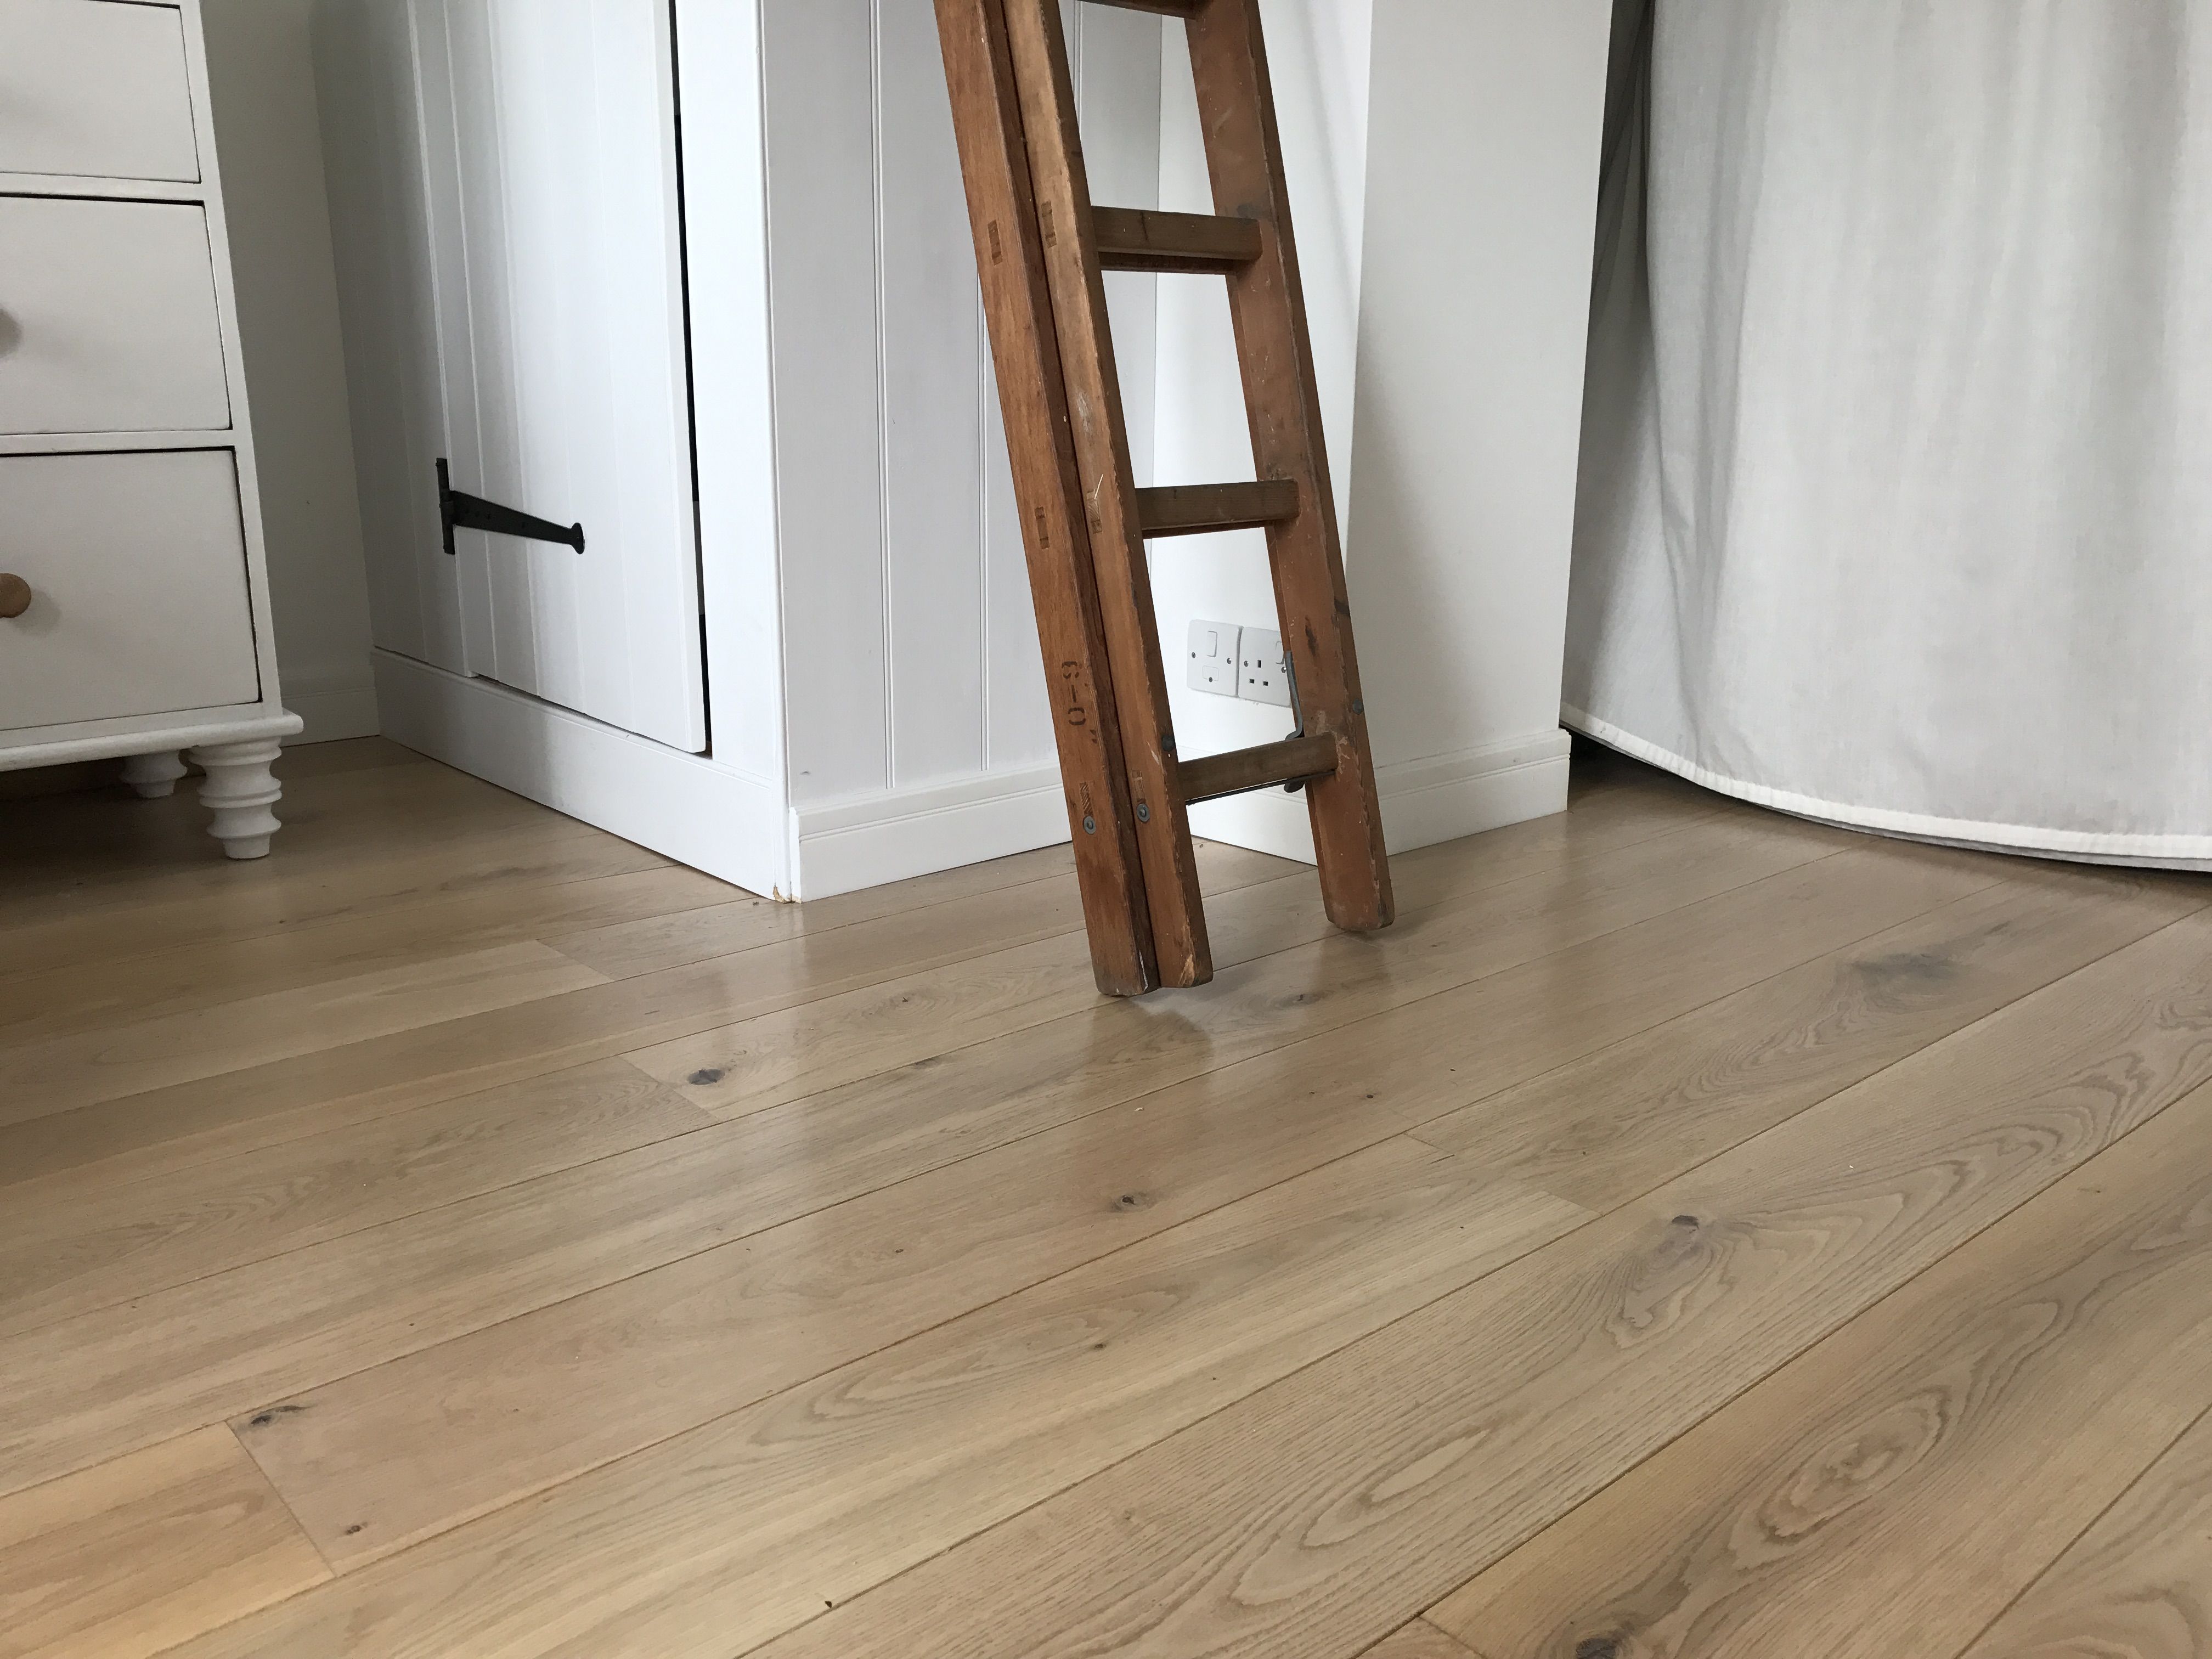 What Are the Benefits of Hiring Flooring Companies in London? | Mr. Journo